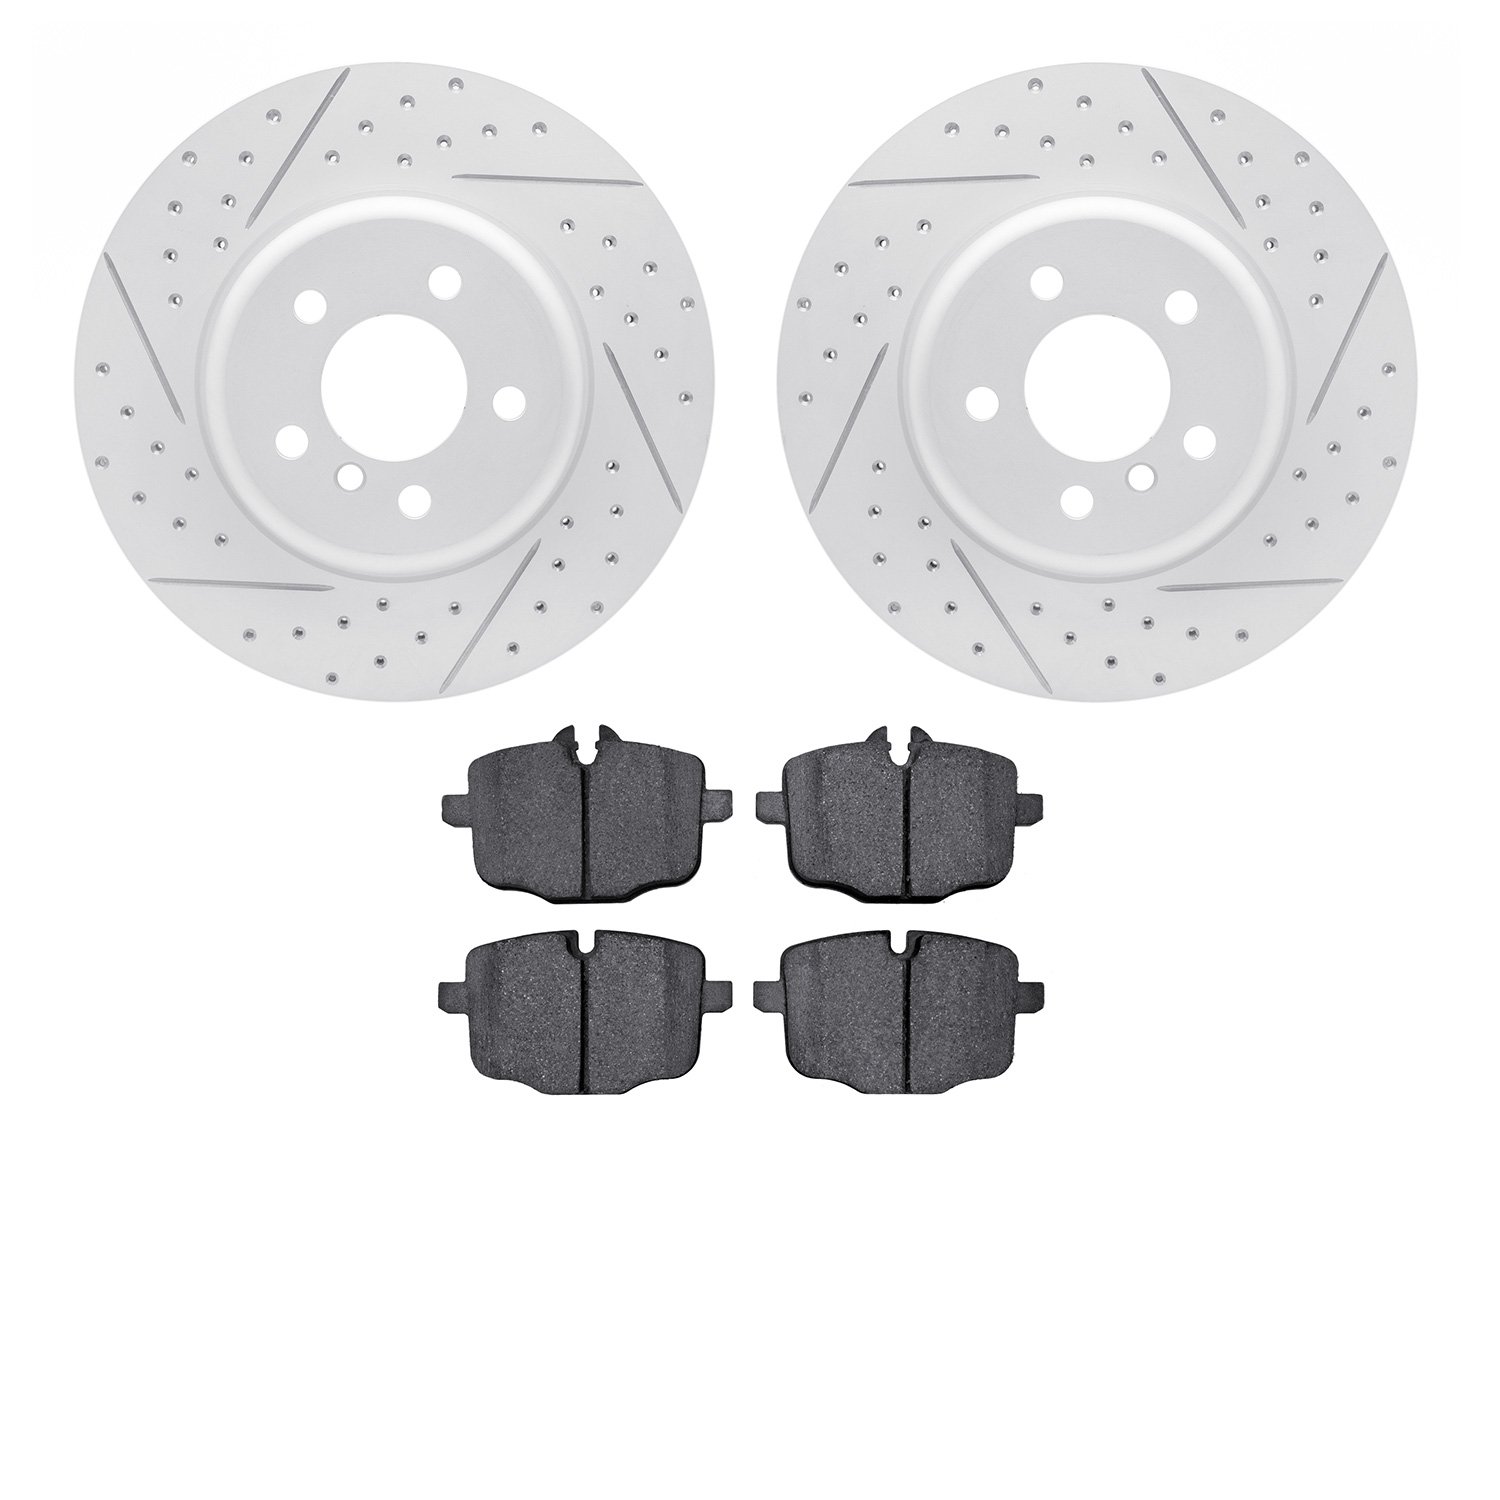 2502-31084 Geoperformance Drilled/Slotted Rotors w/5000 Advanced Brake Pads Kit, 2011-2019 BMW, Position: Rear